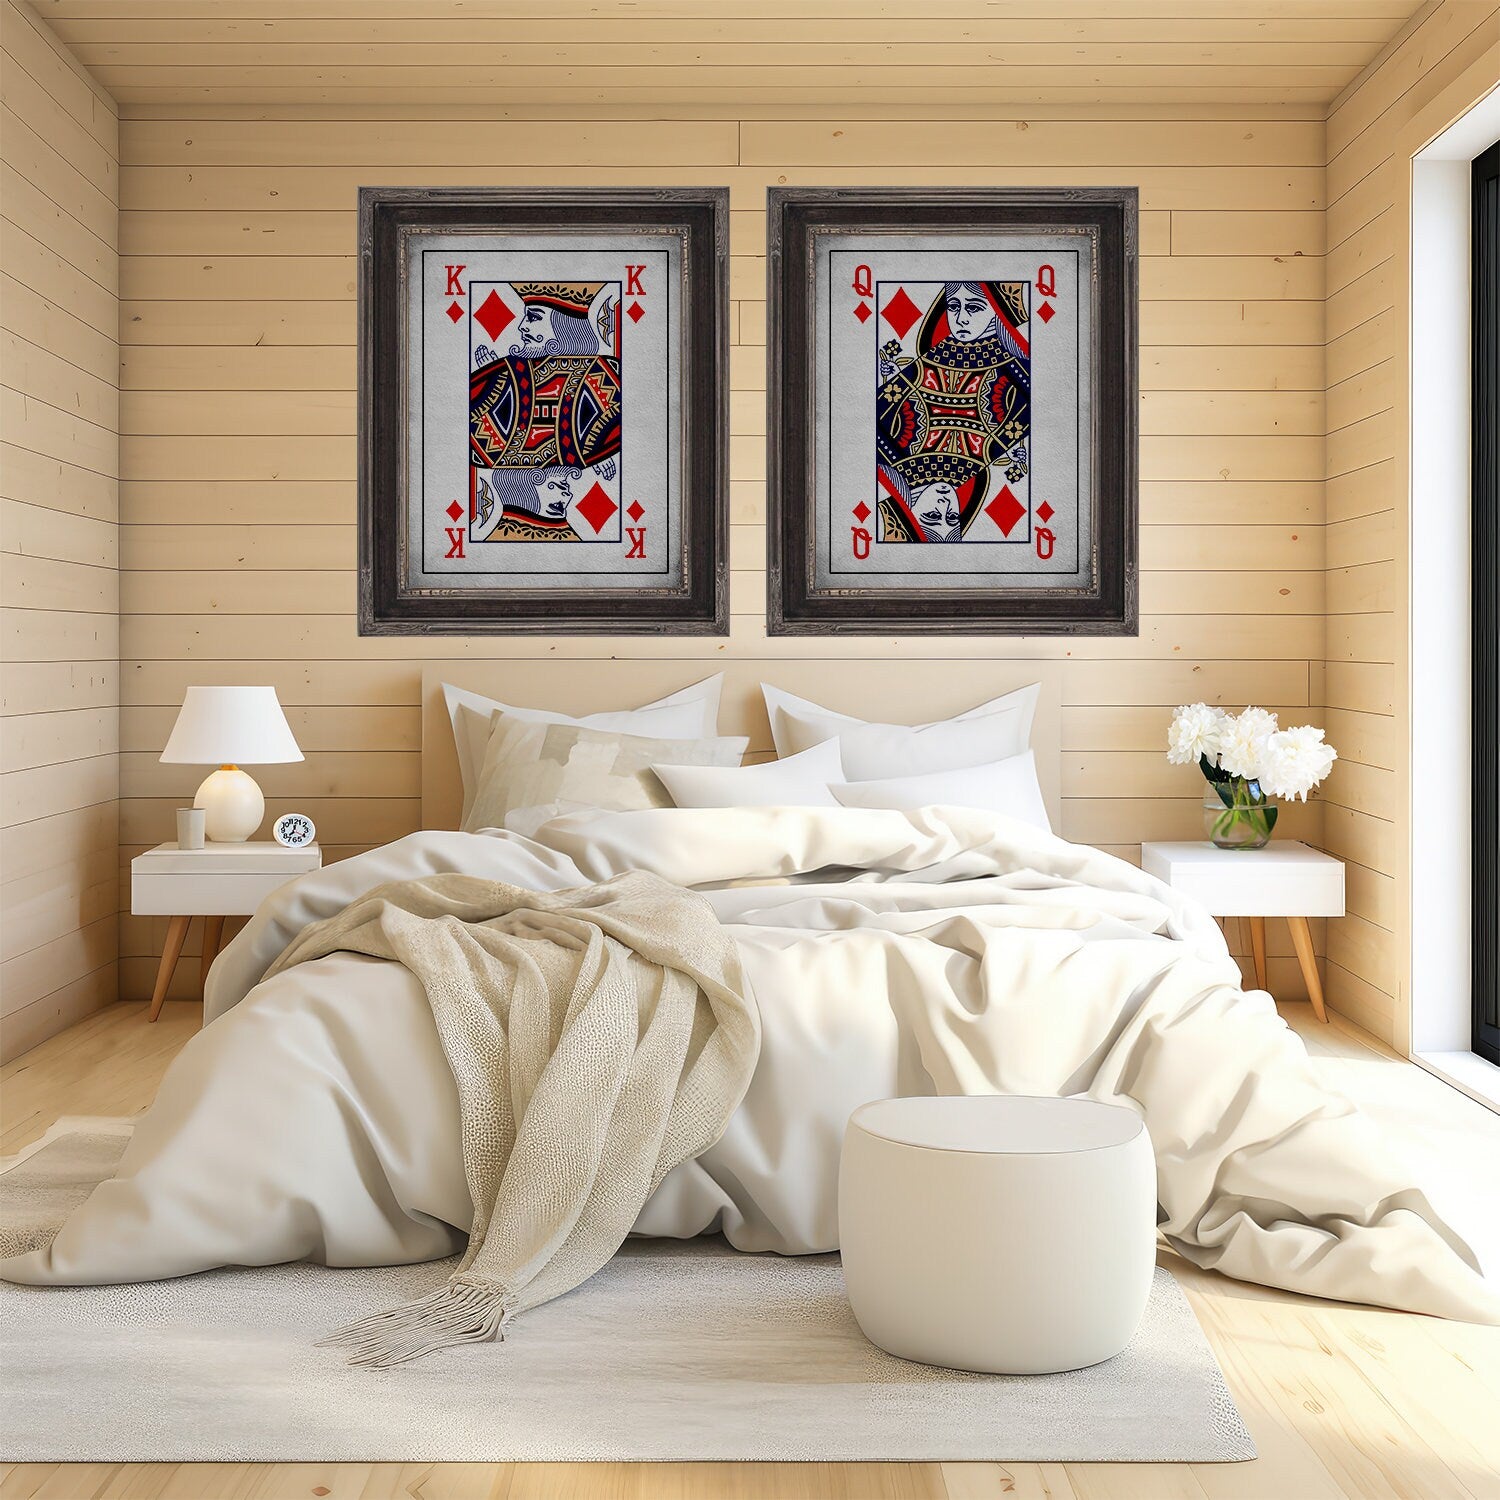 King &amp; Queen of Diamonds Playing Card Art Prints - Rustic Poker Card Posters at Adirondack Retro